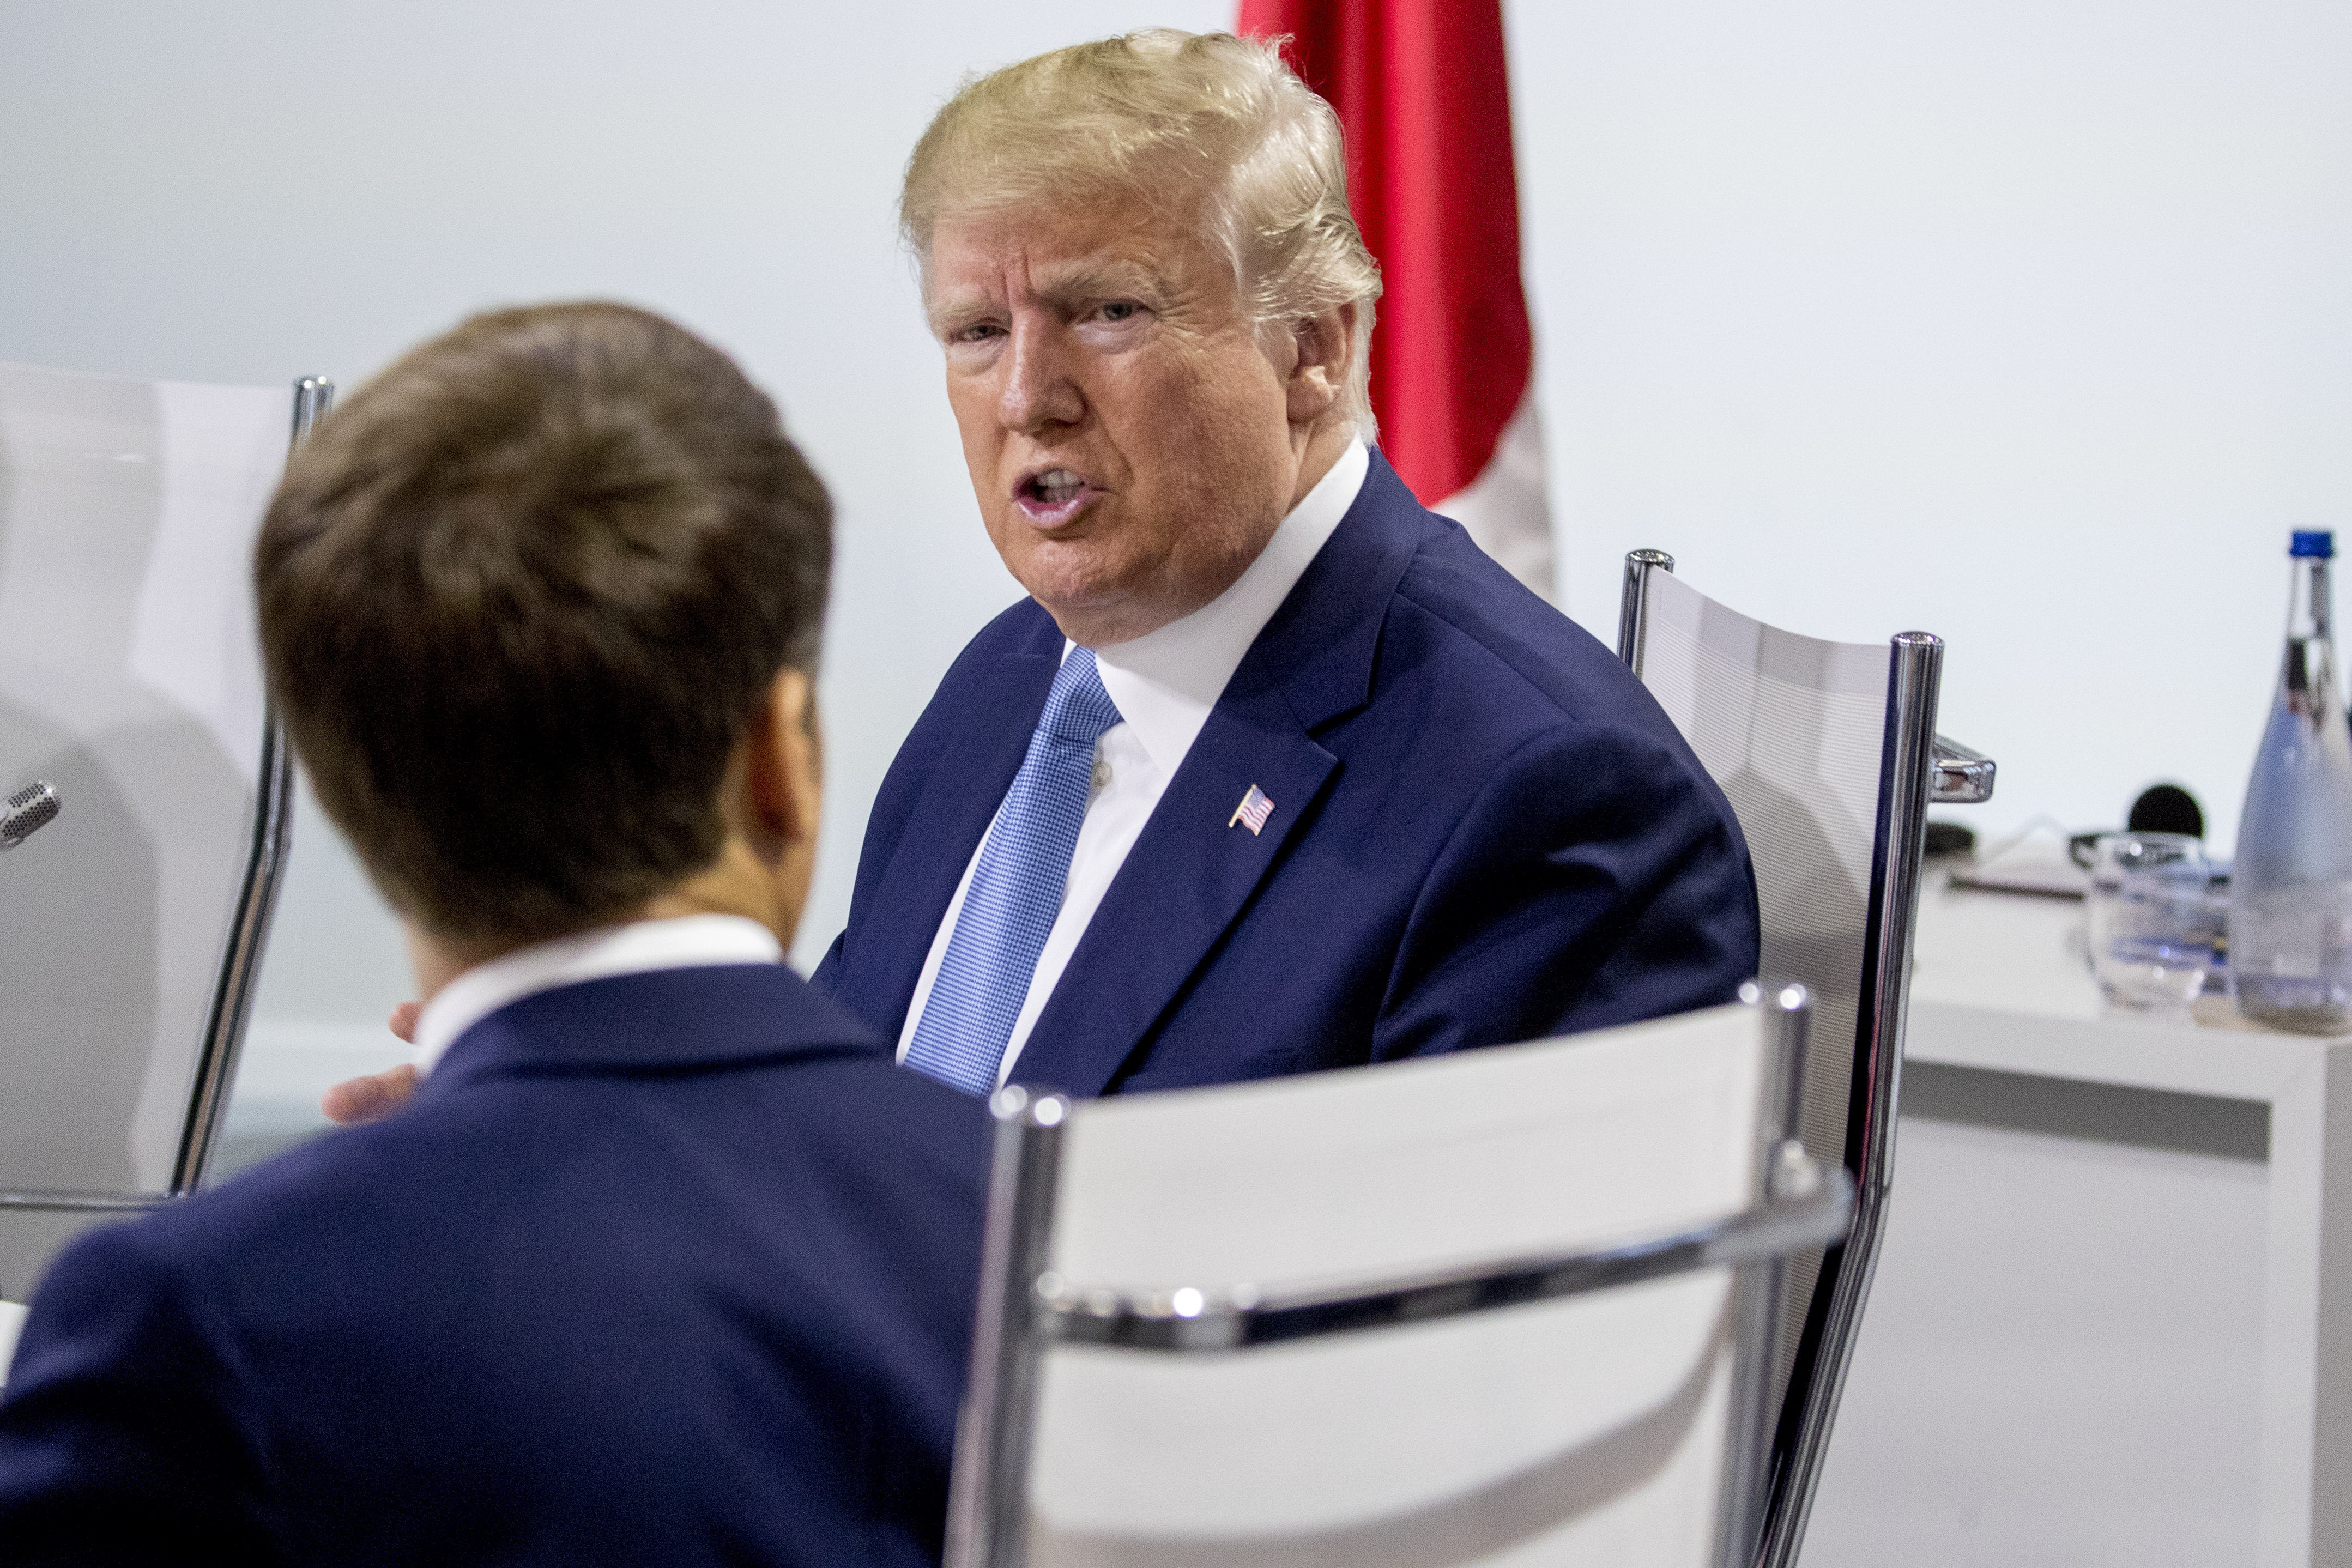 French President Emmanuel Macron, left, and President Donald Trump, right, participate in a G-7 Working Session on the Global Economy, Foreign Policy, and Security Affairs the G-7 summit in Biarritz, France, Sunday, Aug. 25, 2019. (AP Photo/Andrew Harnik, Pool)